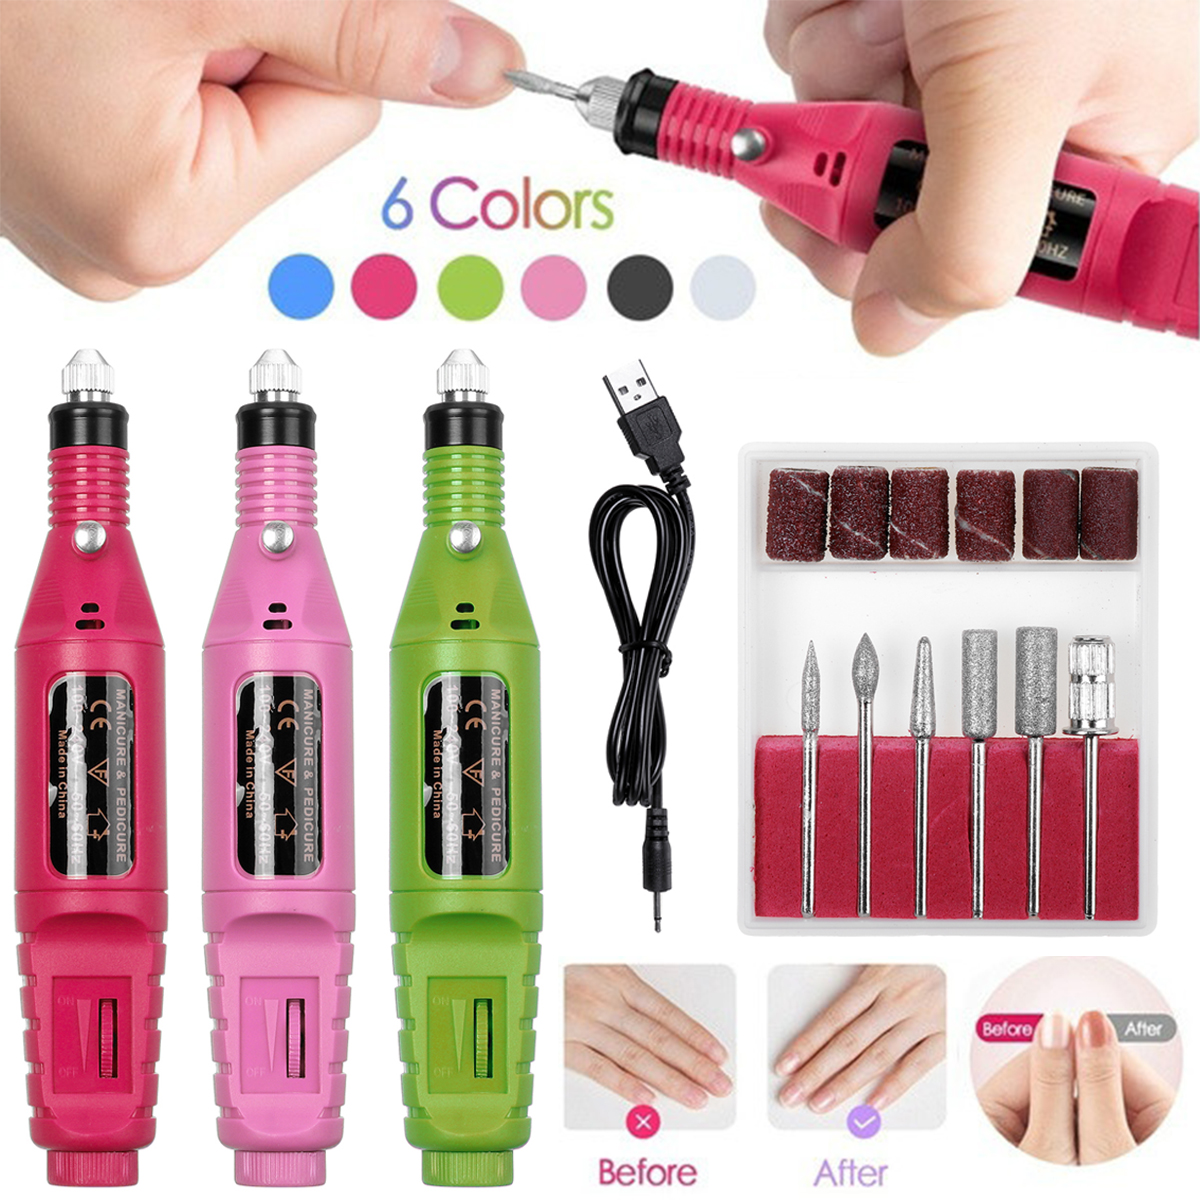 0-20000RPM-6-Color-USB-Charging-Electric-Nail-Grinder-Drill-Portable-Manicure-Pedicure-Nail-Machine--1764630-3